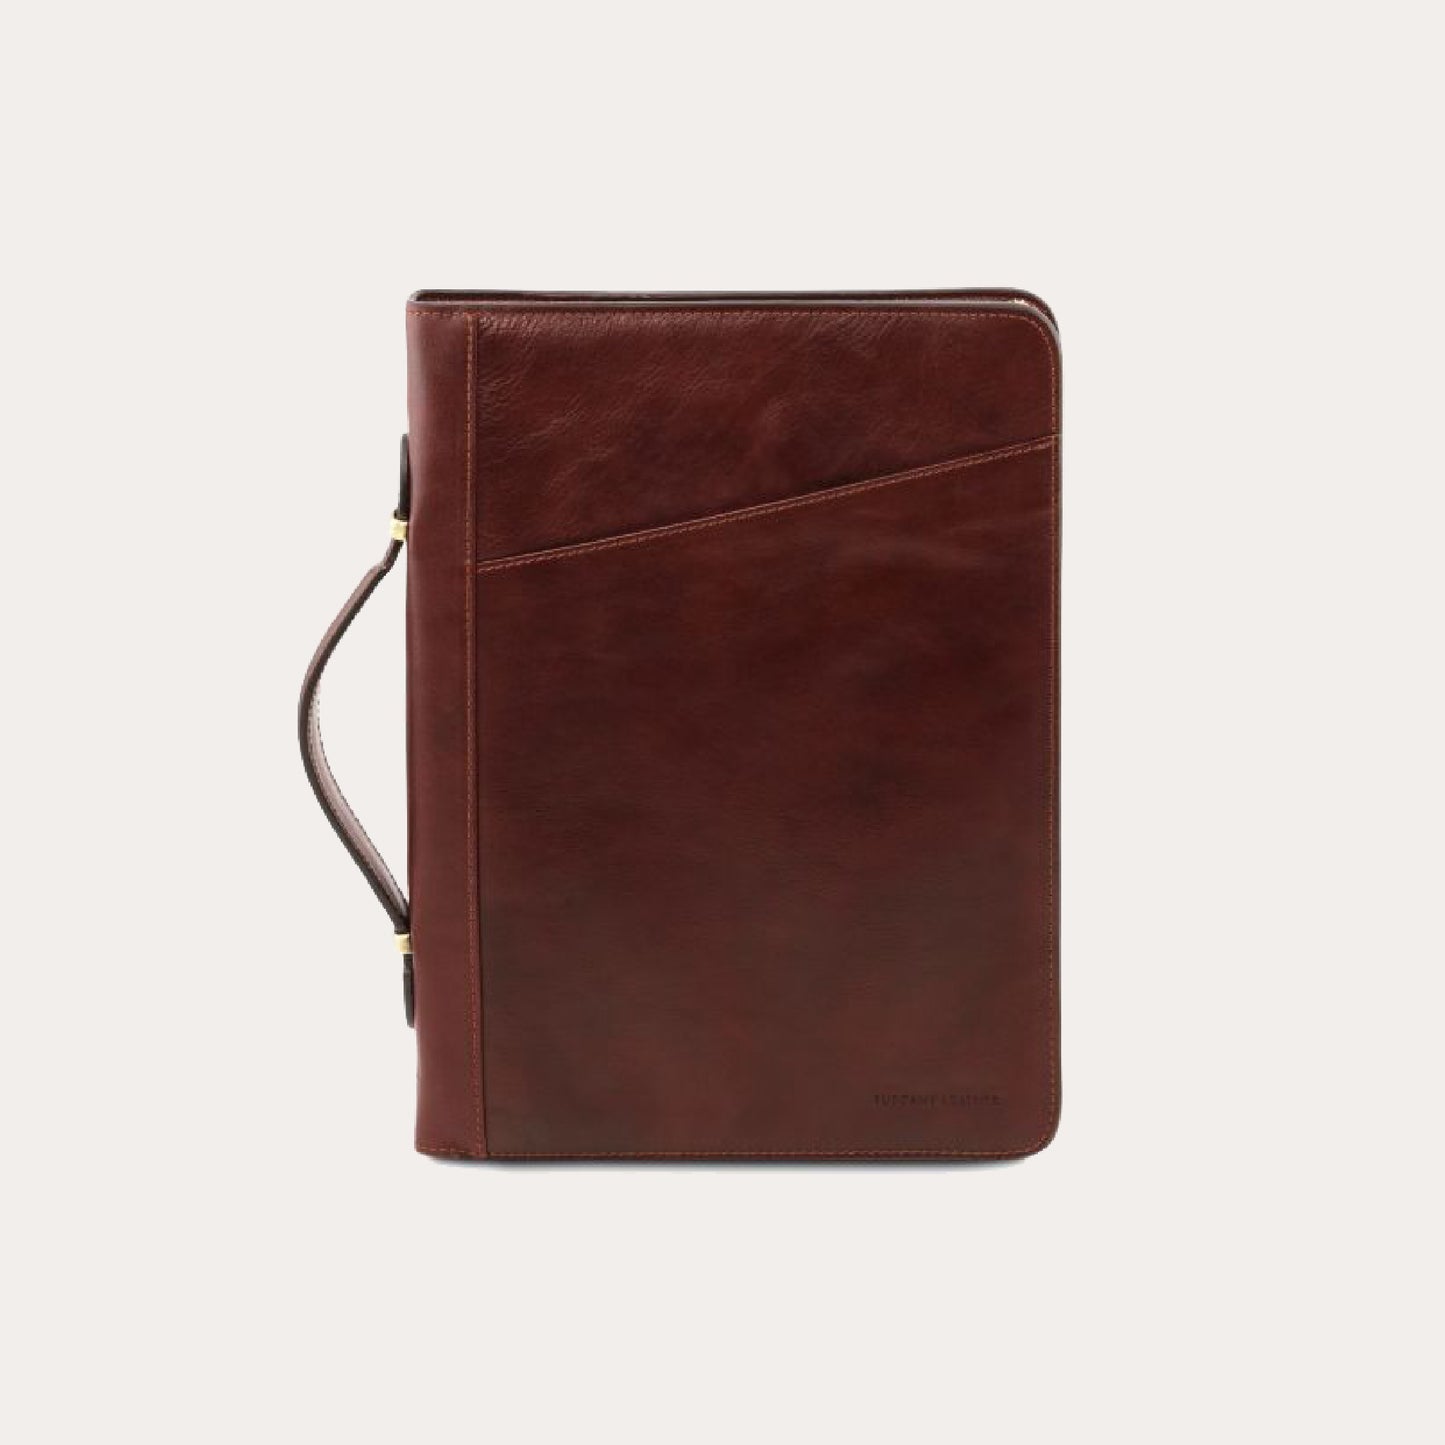 Tuscany Leather Brown Leather A4 Portfolio with Handle